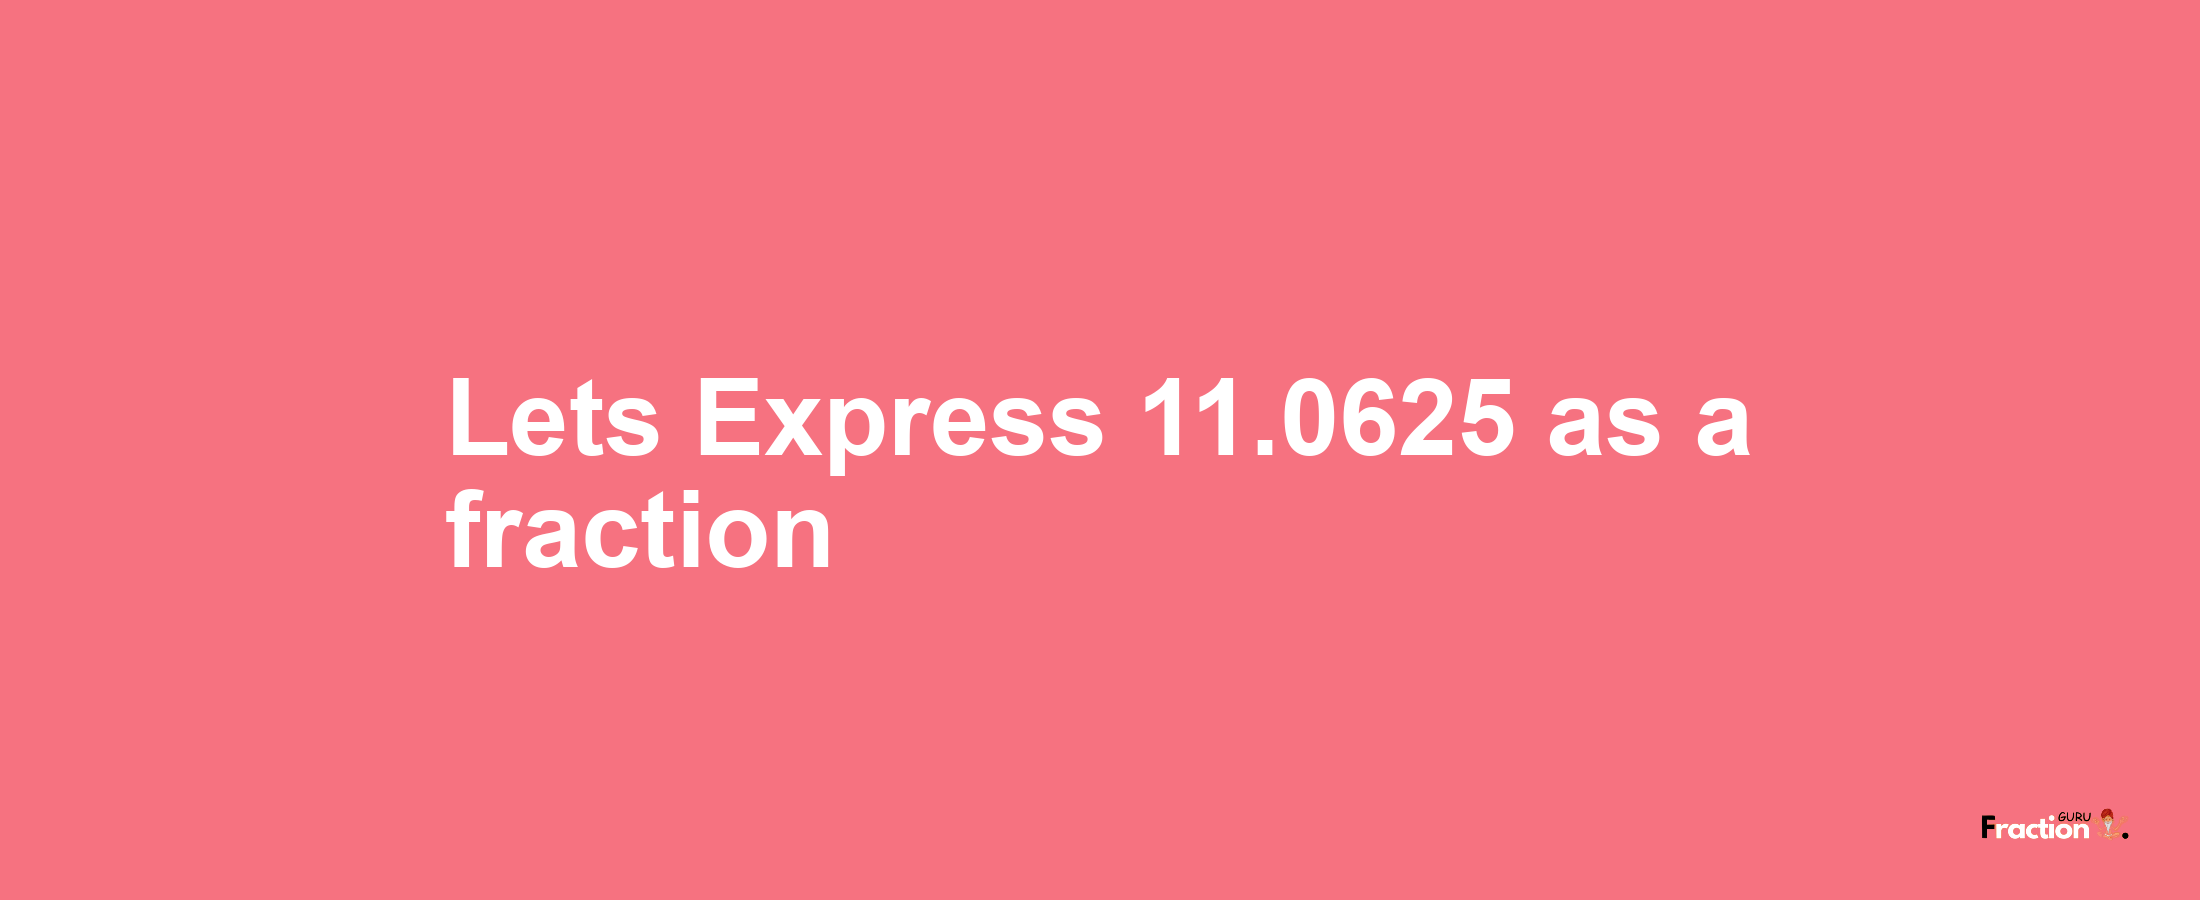 Lets Express 11.0625 as afraction